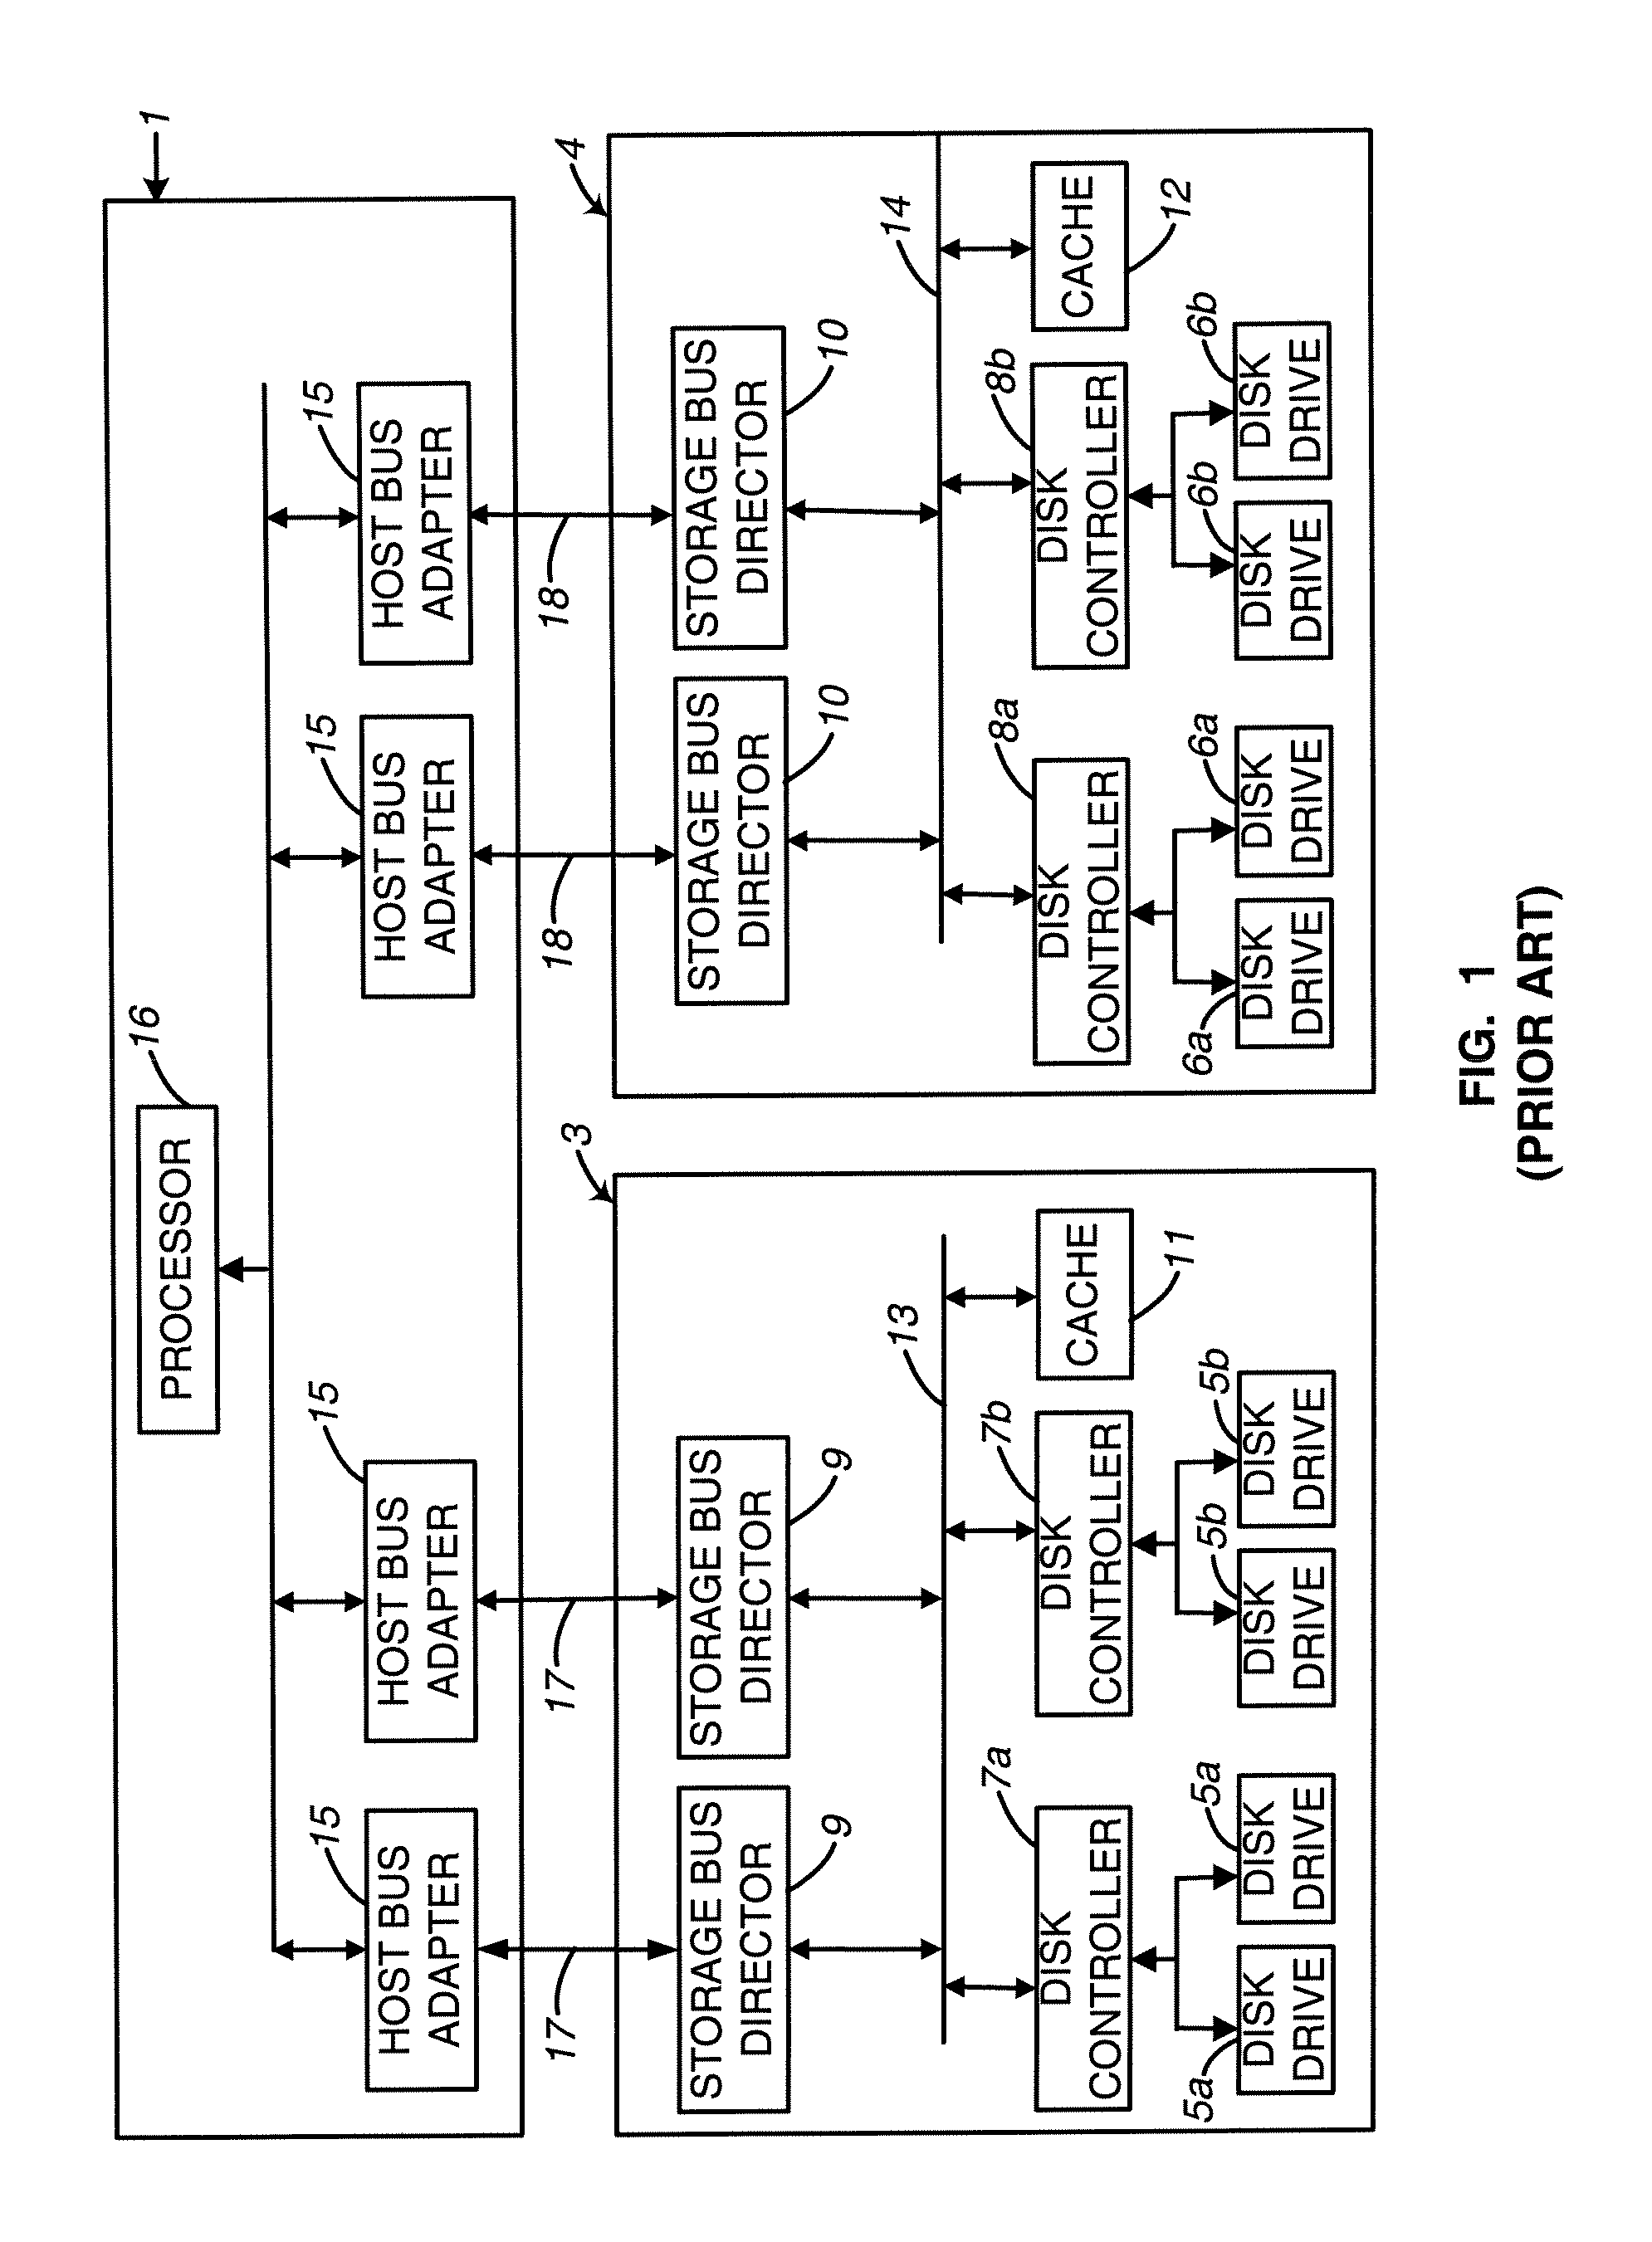 Methods and systems for managing I/O requests to minimize disruption required for data migration